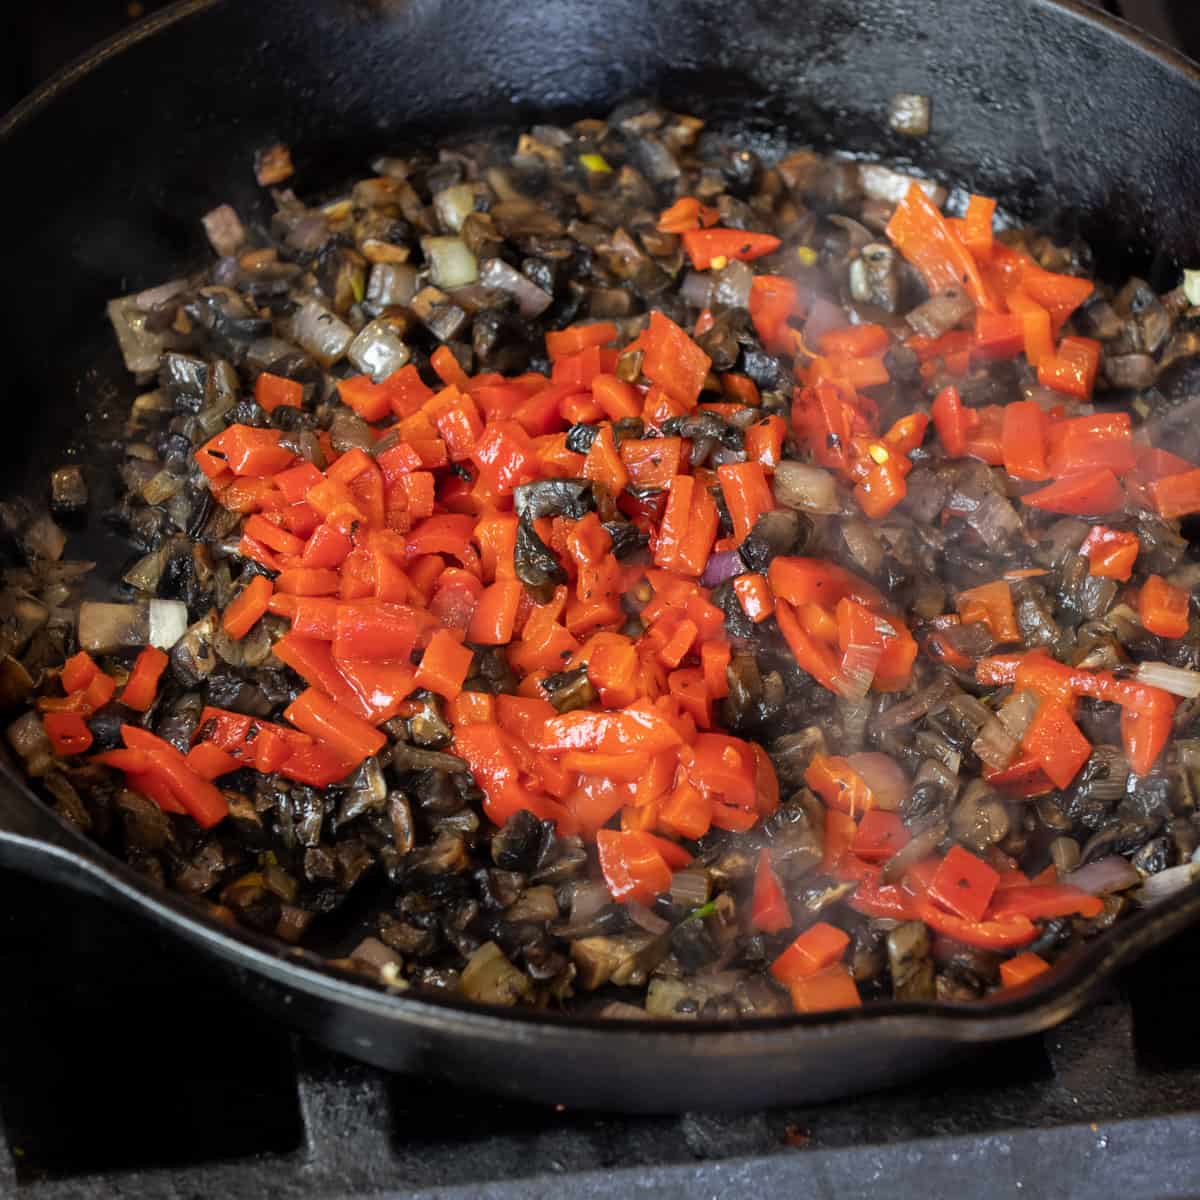 Roasted red pepper and mushrooms in a skillet.